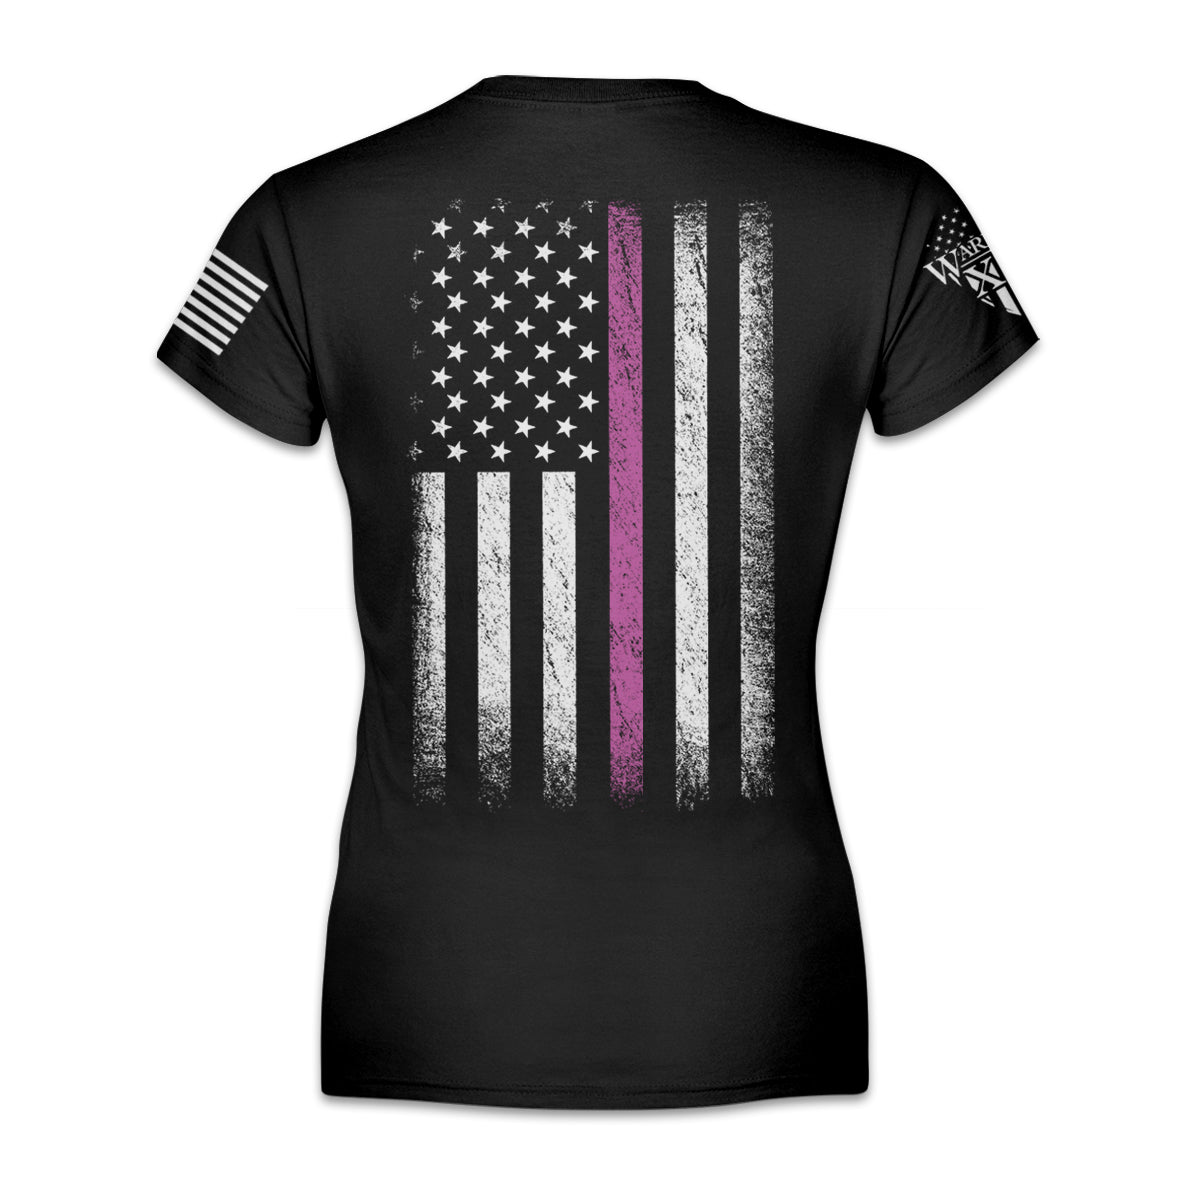 A black women's relaxed shirt with shirt features a thin pink line flag to show support for all breast cancer warriors printed on the back of the shirt.